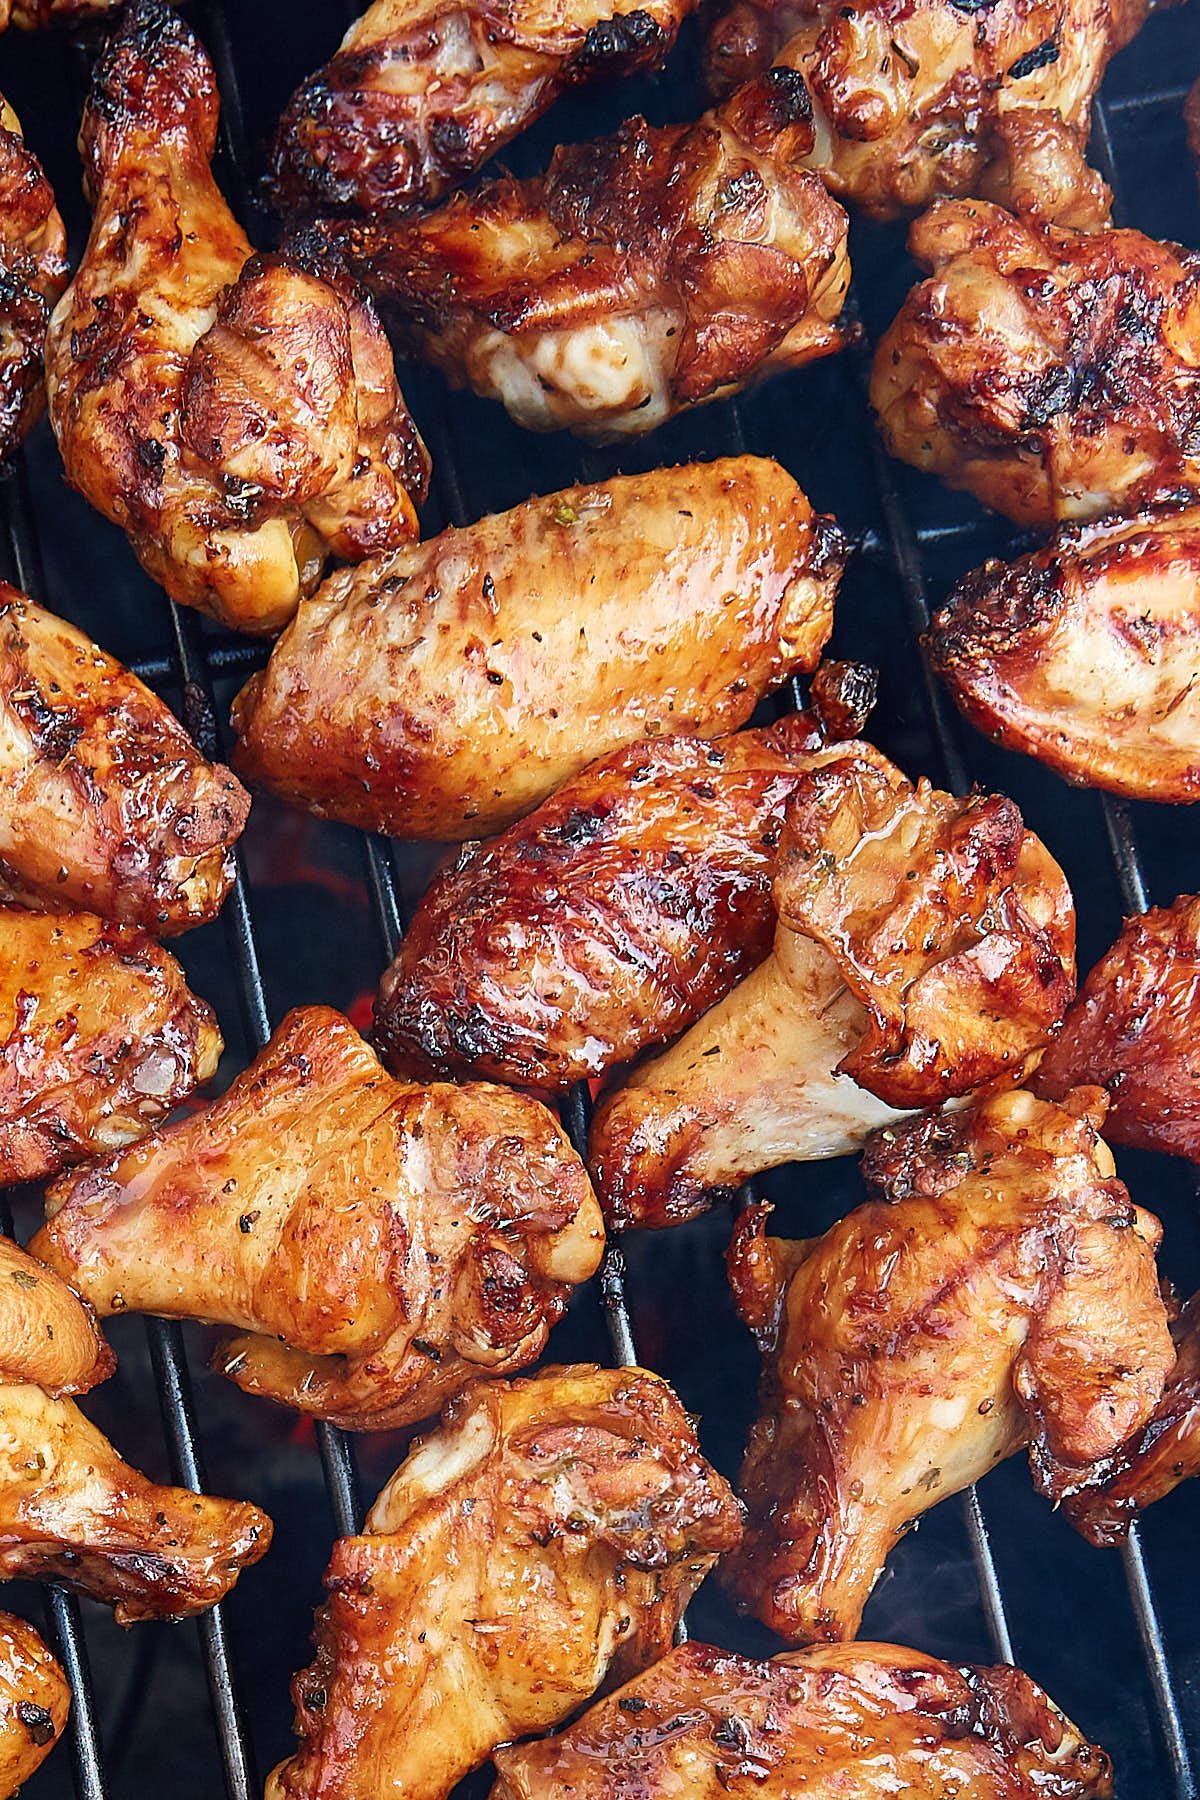 Chicken wings grilling on a grill over hot red charcoal.